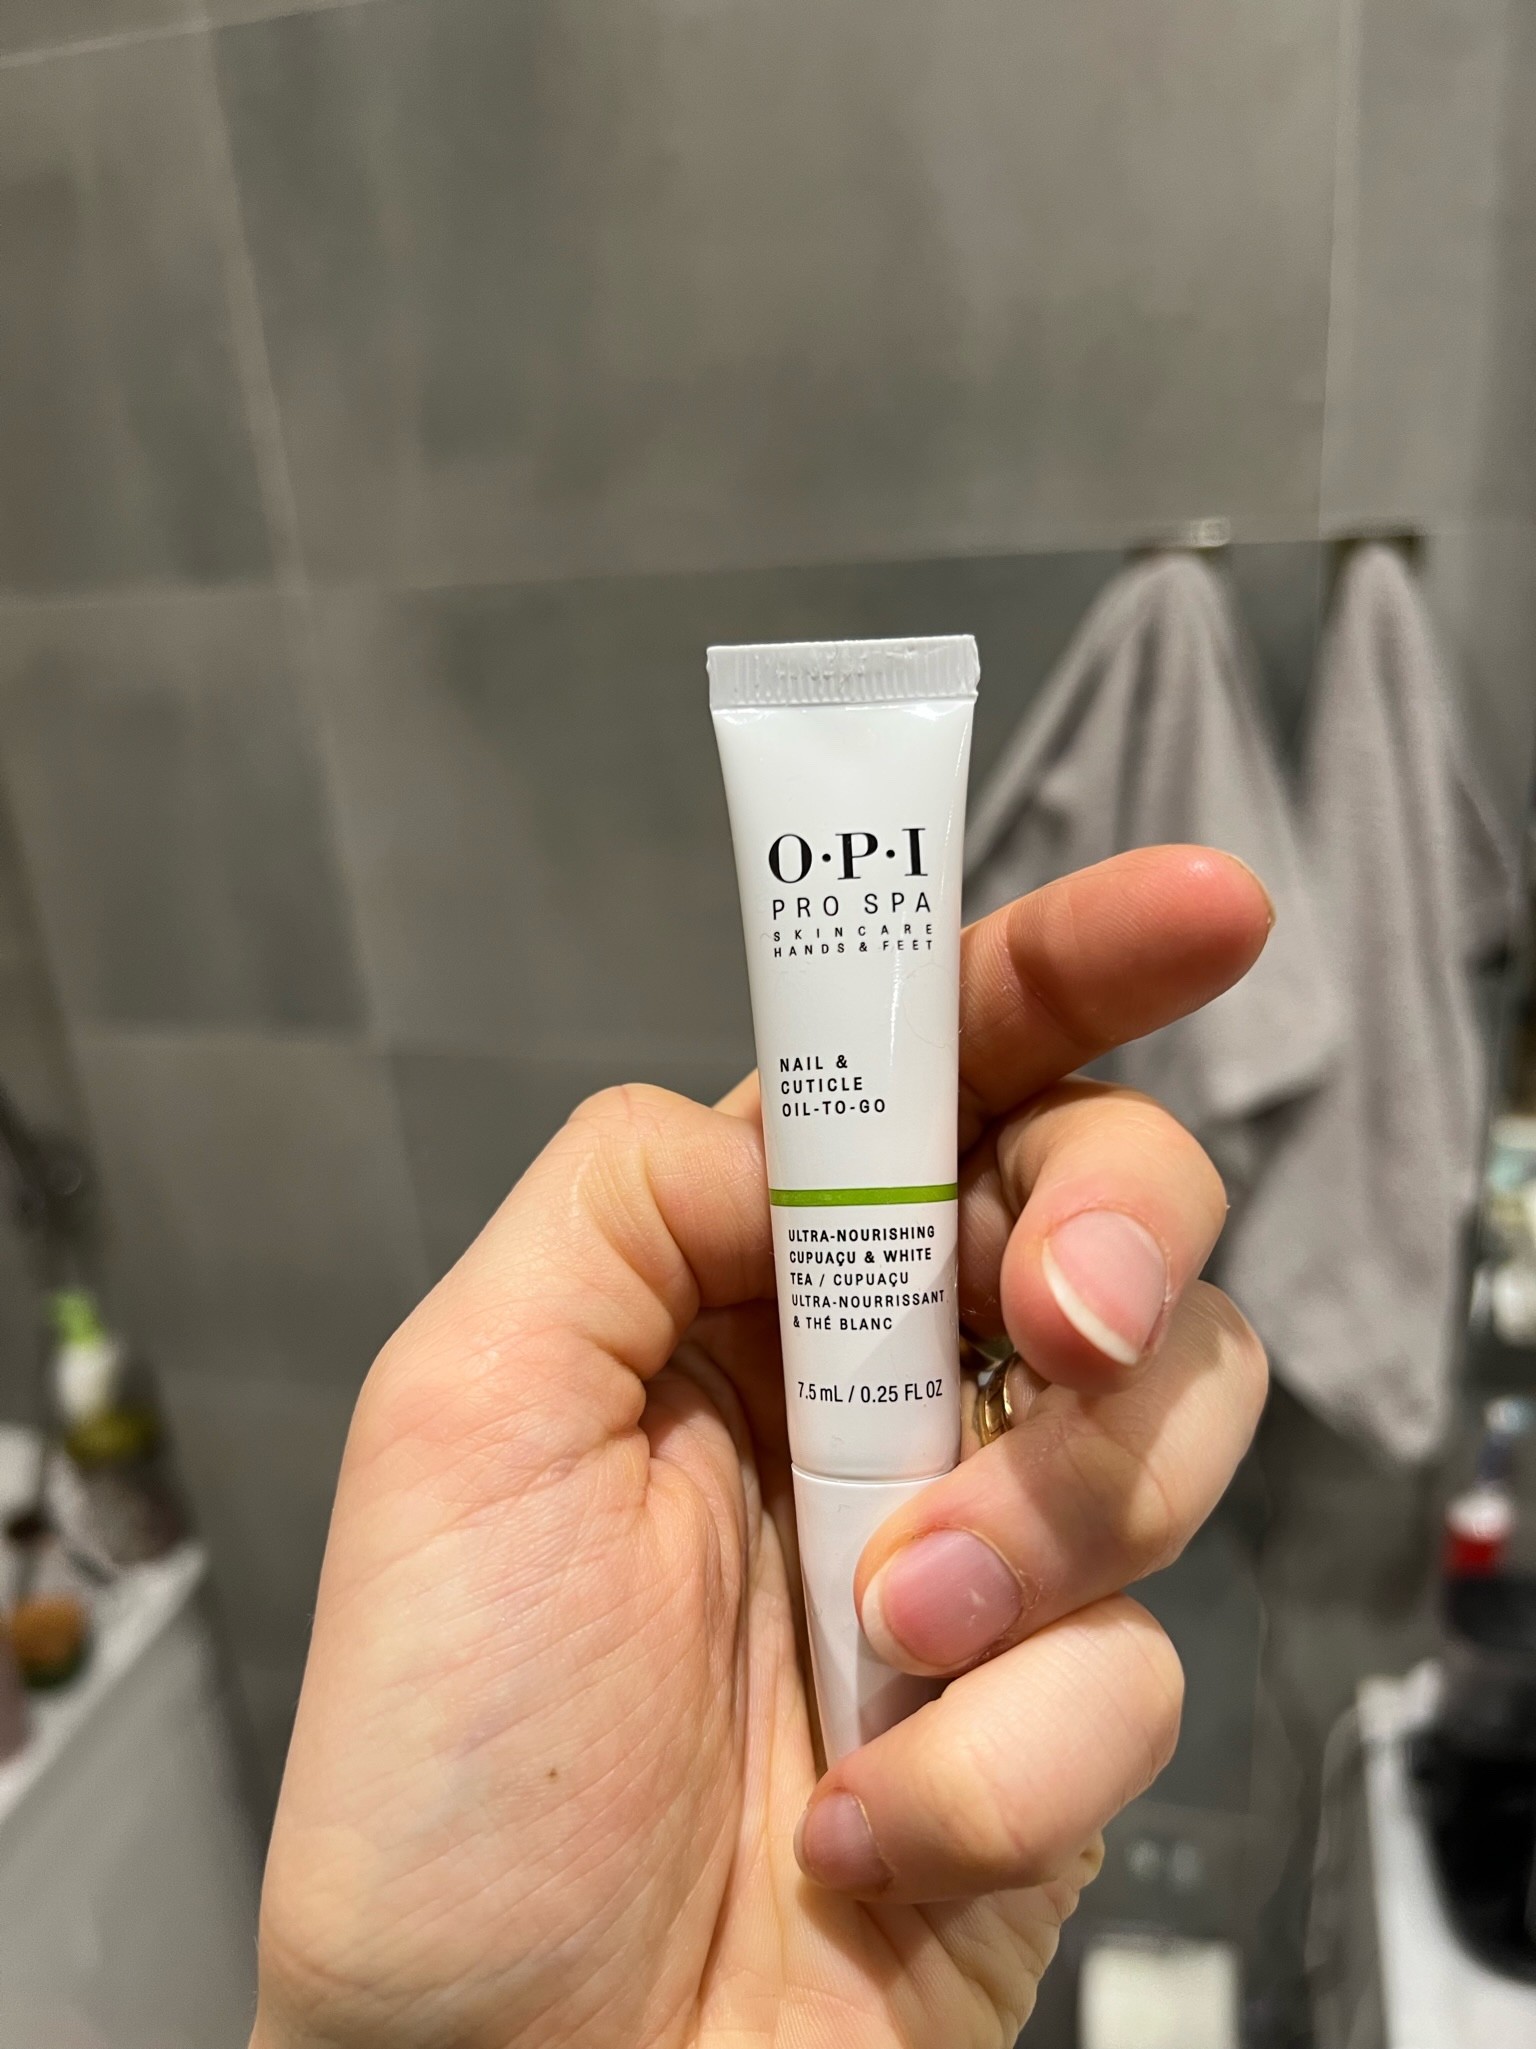 Review: Nourish Your Nails Anywhere with OPI Pro Spa Nail & Cuticle Oil-to-Go